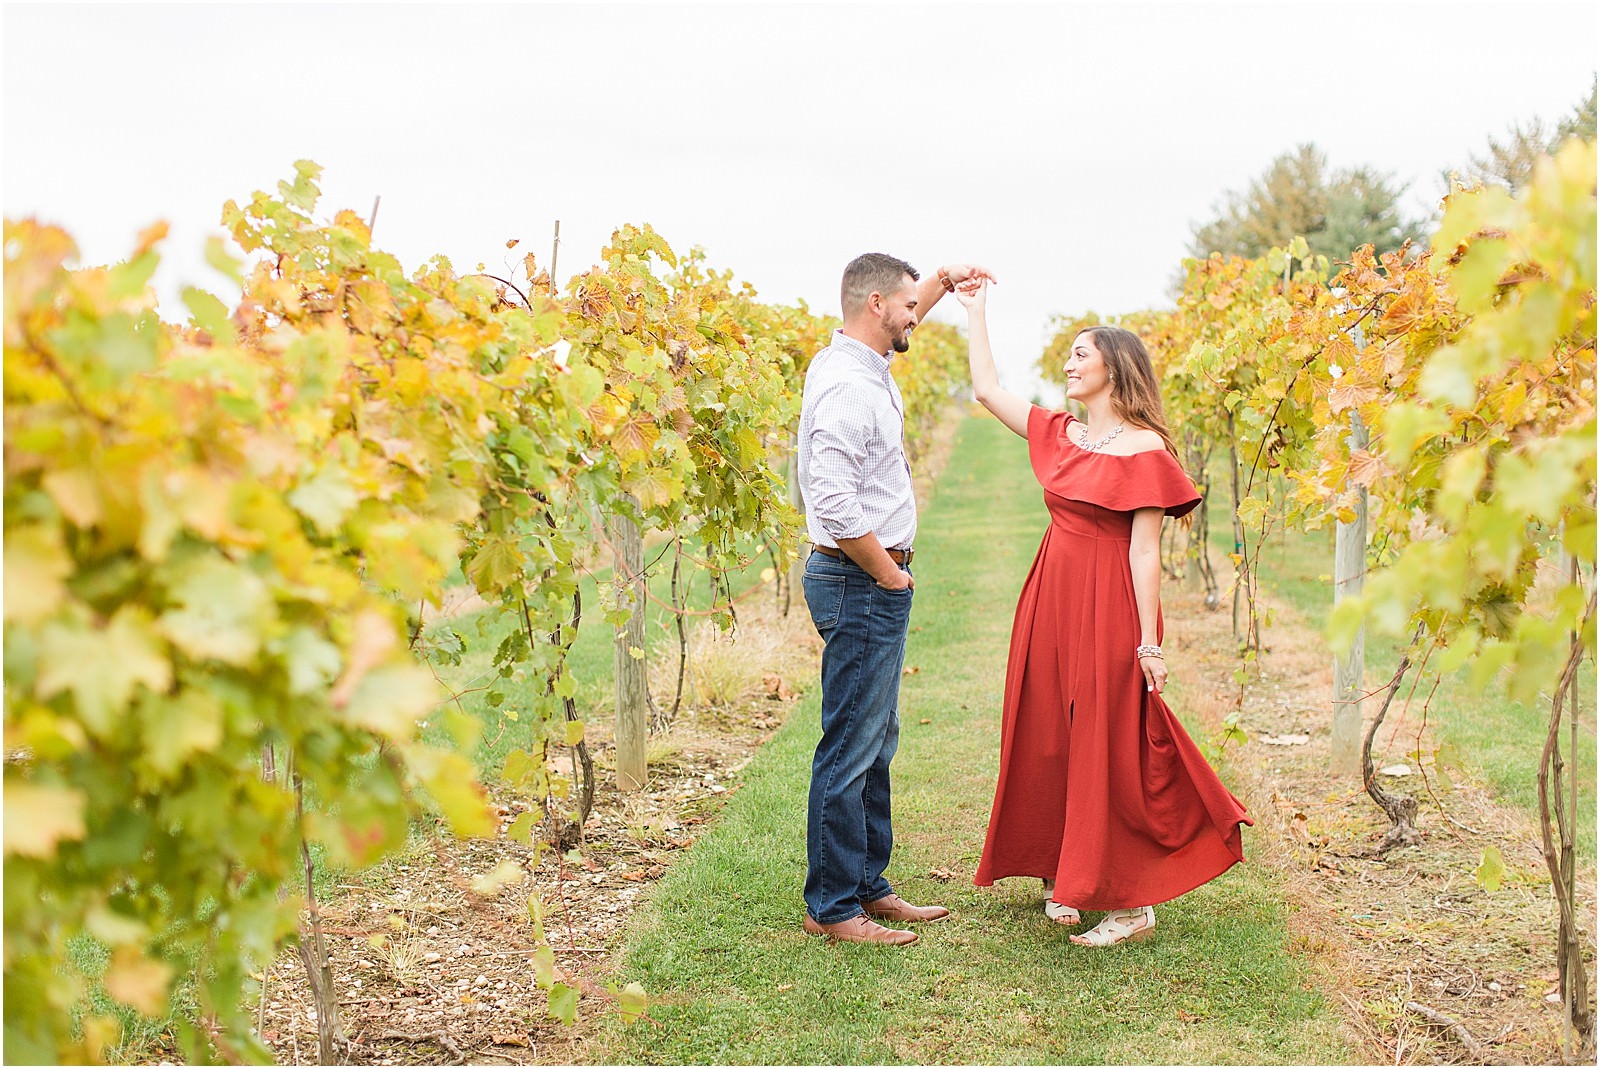 A Fall Oliver Winery Engagement Session | Sally and Andrew | Bret and Brandie Photography 0046.jpg